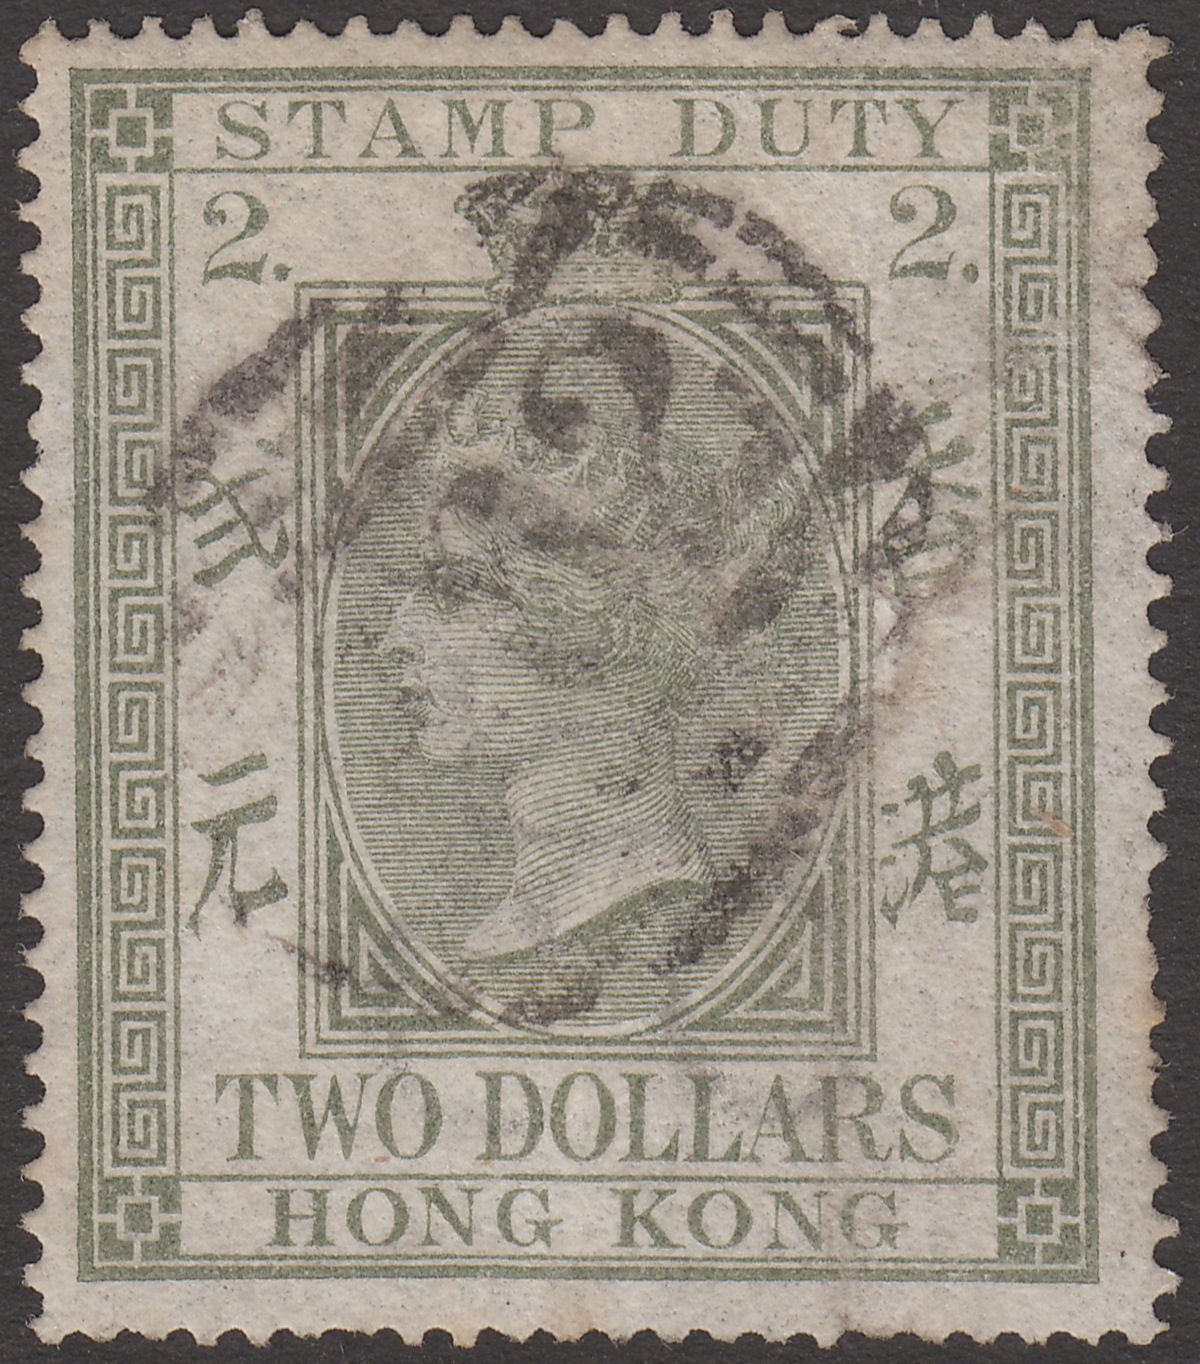 Hong Kong 1874 QV Stamp Duty $2 Olive-Green Used SG F1 cat £70 Postal Fiscal